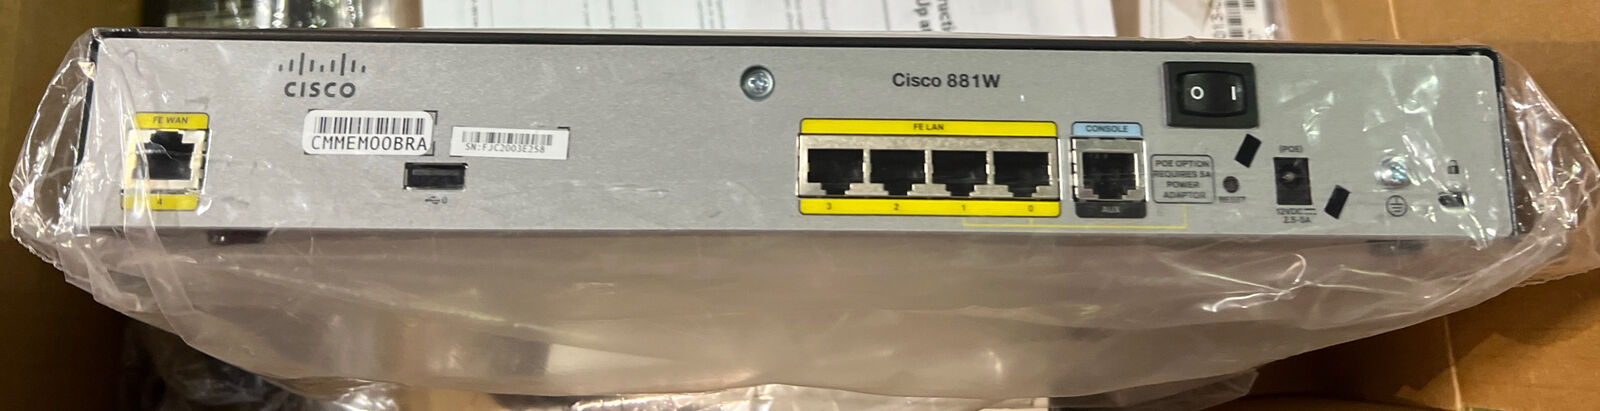 Cisco 881W Integrated Services Router C881W-A-K9 V01